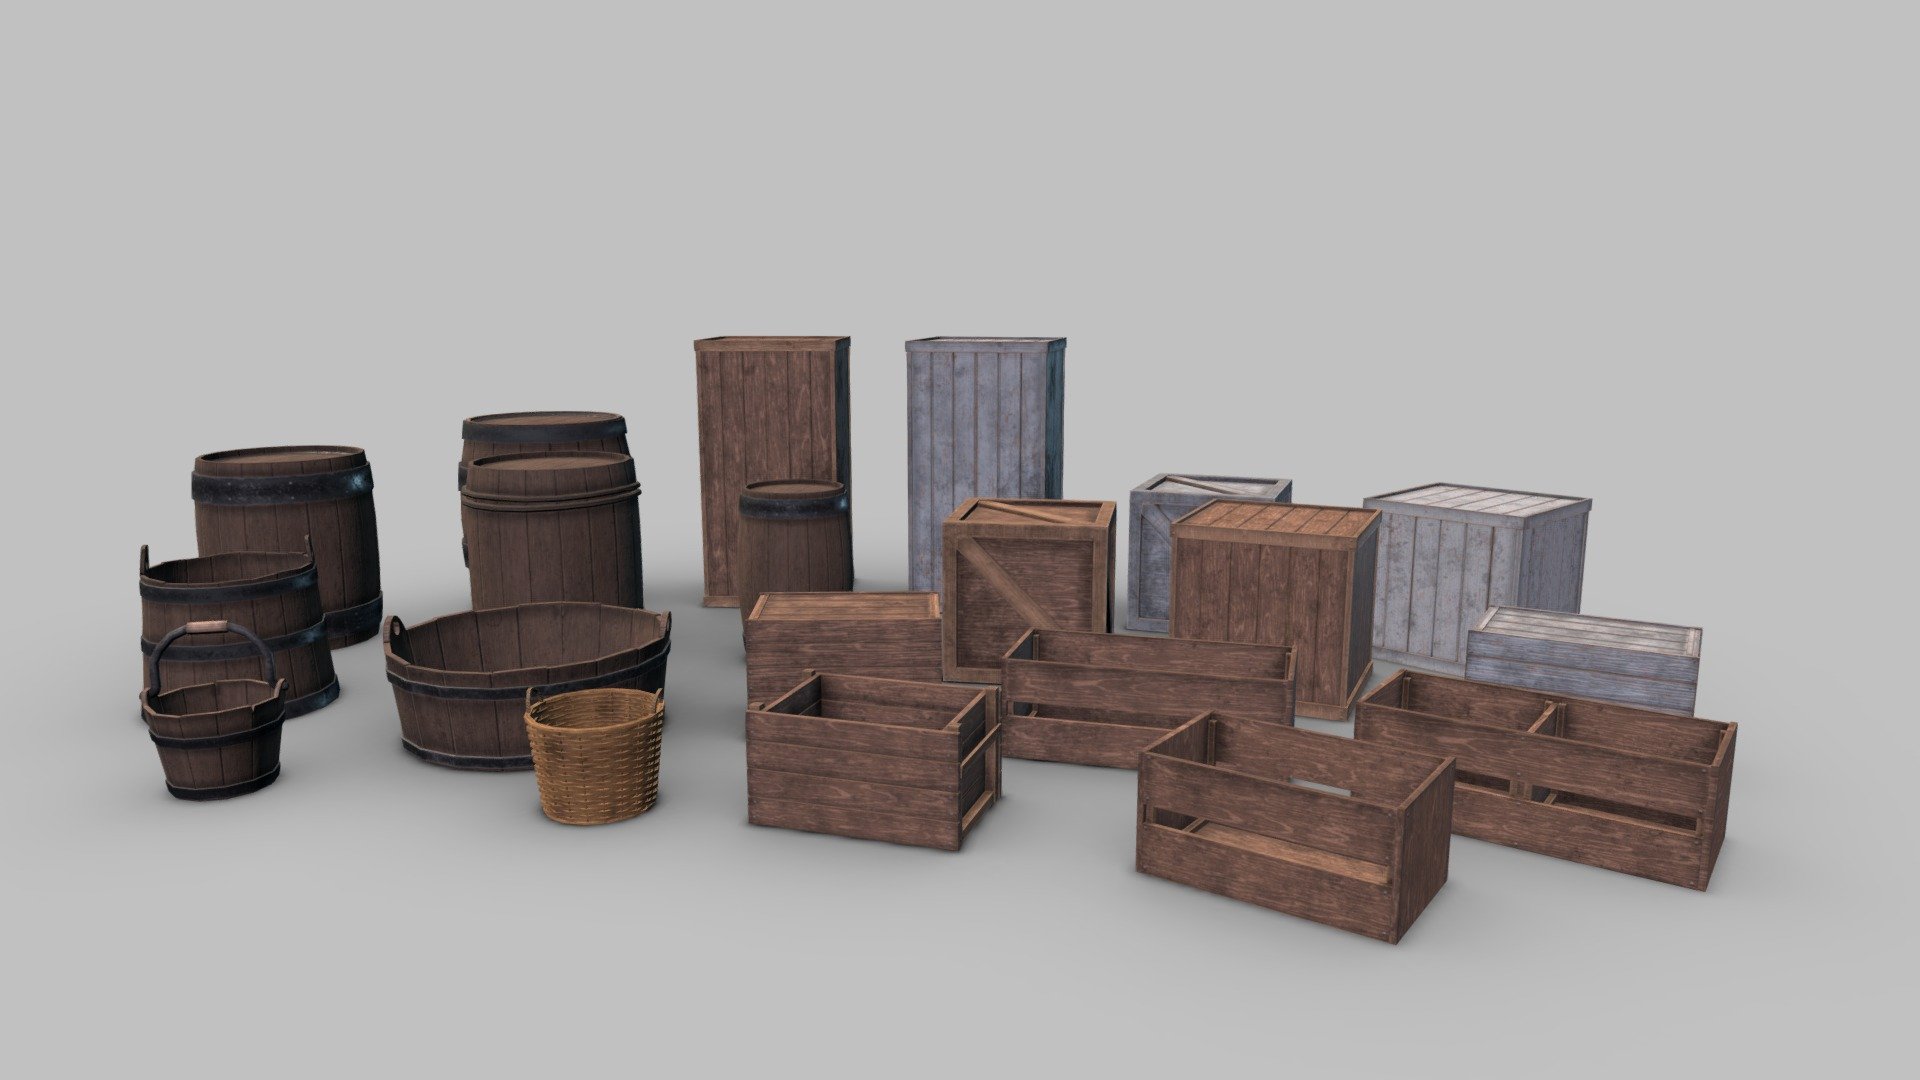 This low poly package of 20 different wooden, storage props contains: 4 barrels, 1 bucket, 1 basket, 1 tub, 1 vat, 8 crates (4 painted) and 4 open crates. Every model comes with a PBR material: Albedo, Roughness, Metallic, Normal and Ambient Occlusion, all 1024x1024 (an additional file with 512x512 textures is inclusive). Models done in Maya and the textures in Substance Painter 3d model